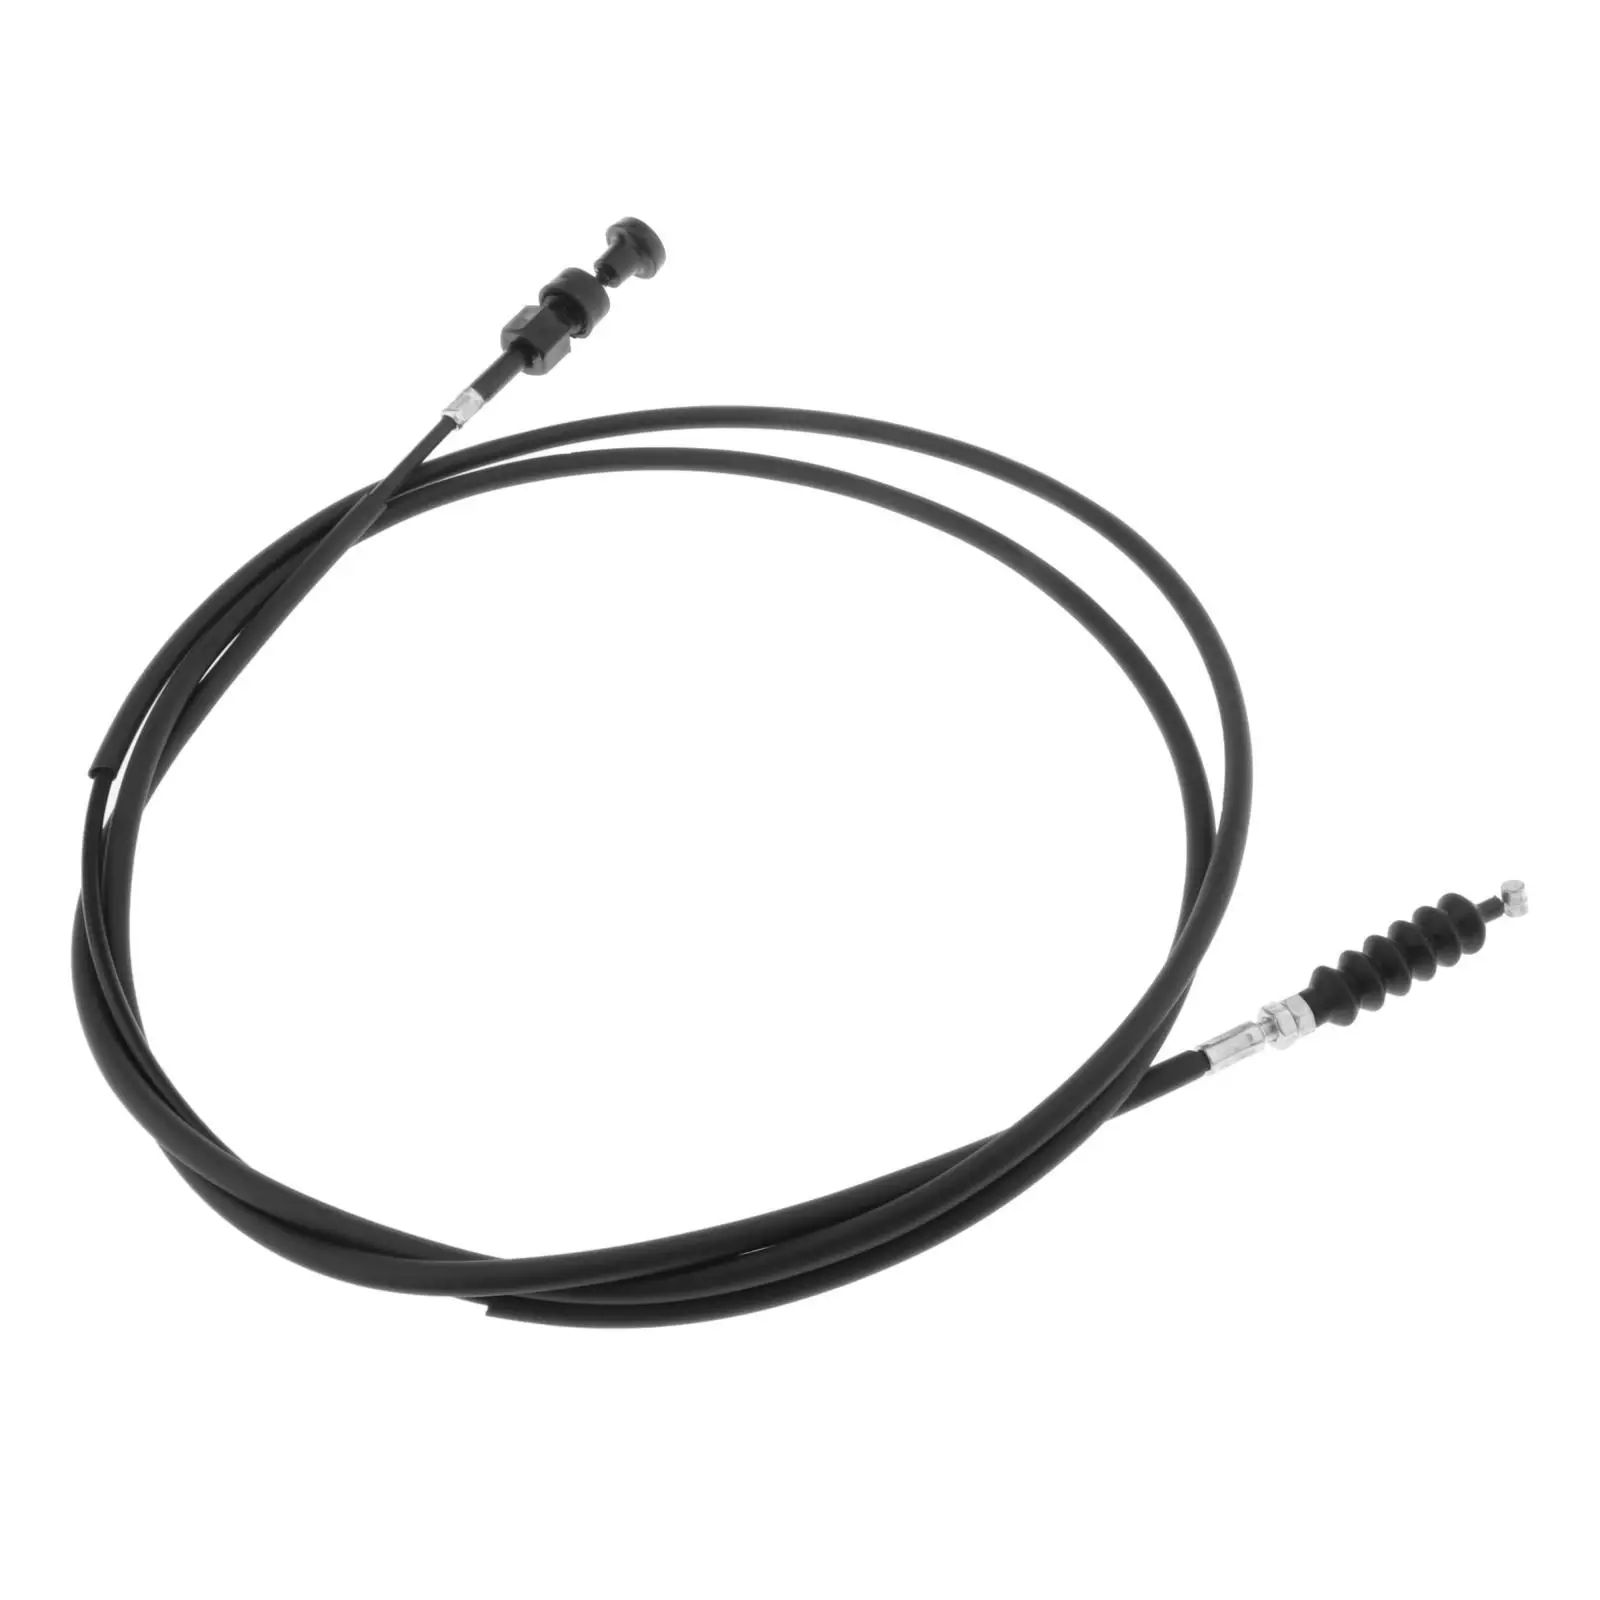 Choke 54017-1208 Starter Cable Fit for 3010 3020 Mule